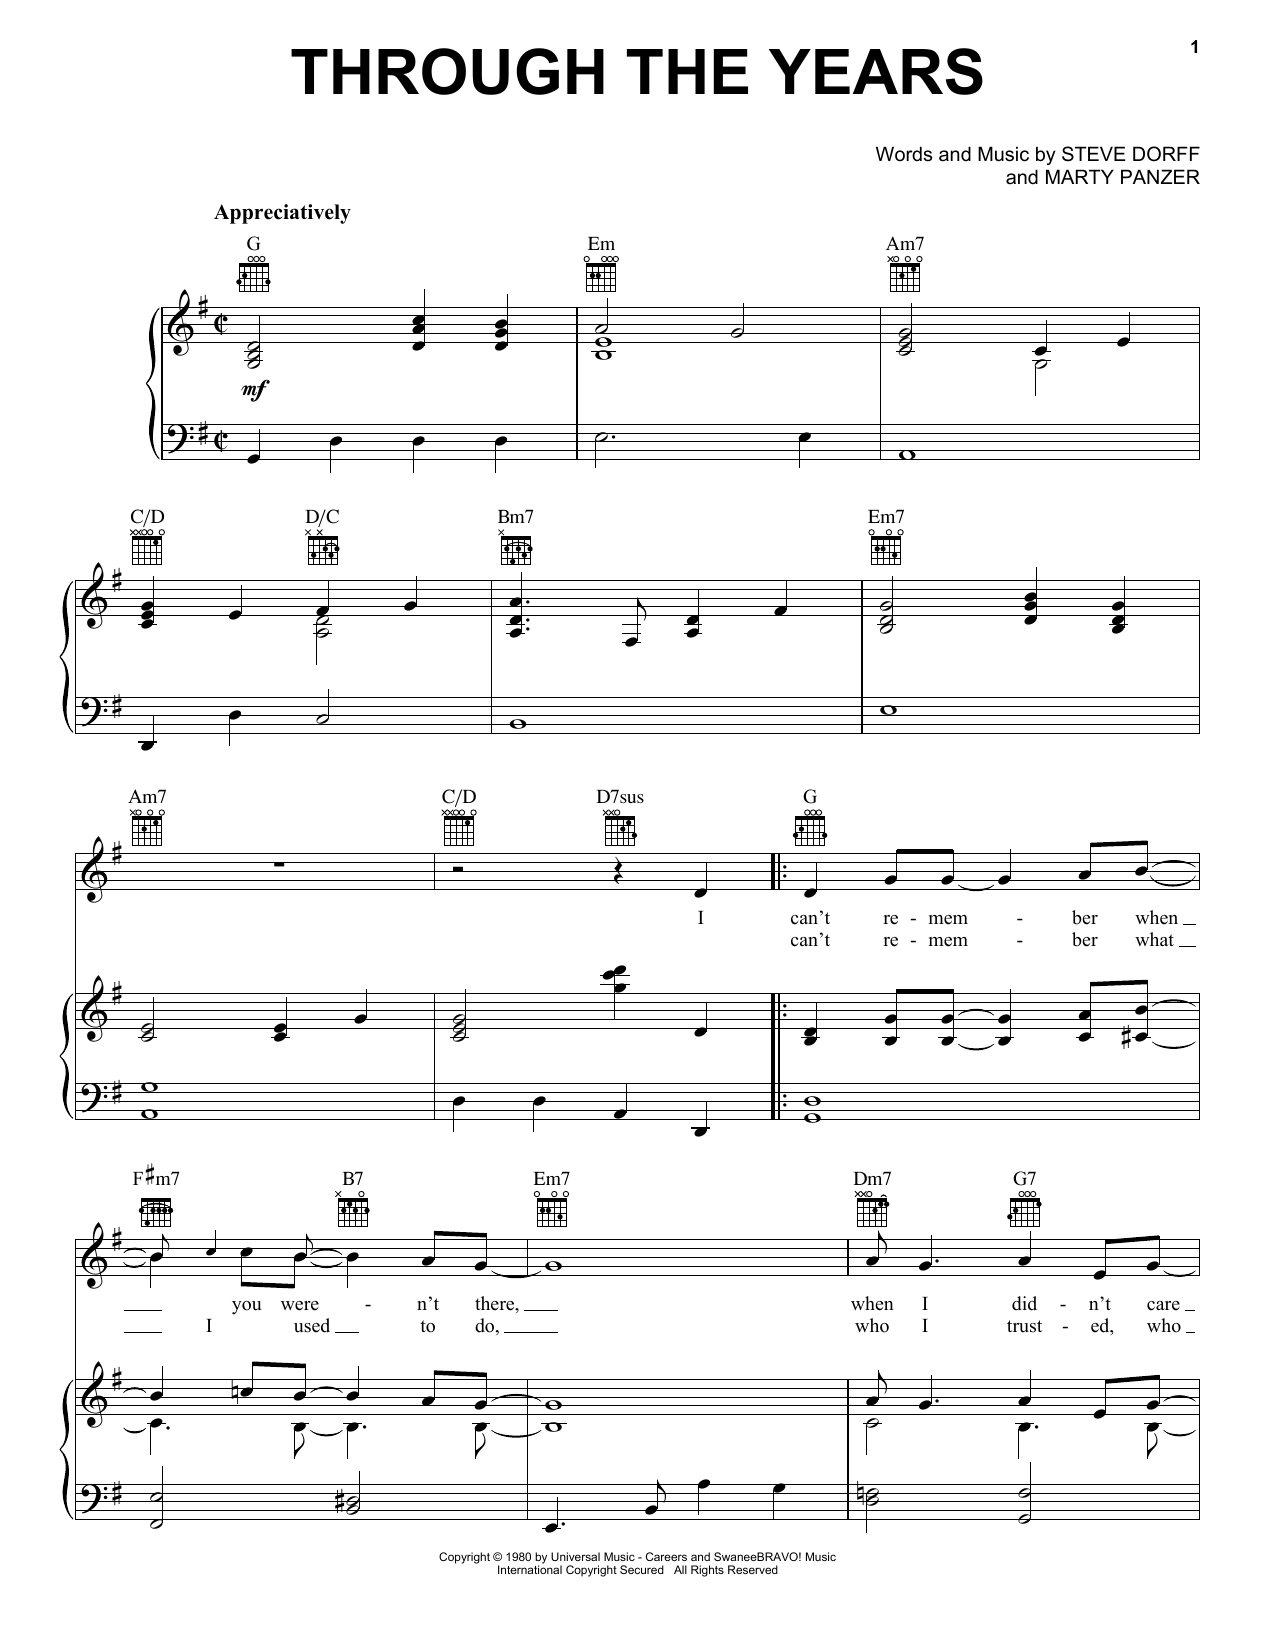 Kenny Rogers Through The Years sheet music notes and chords. Download Printable PDF.